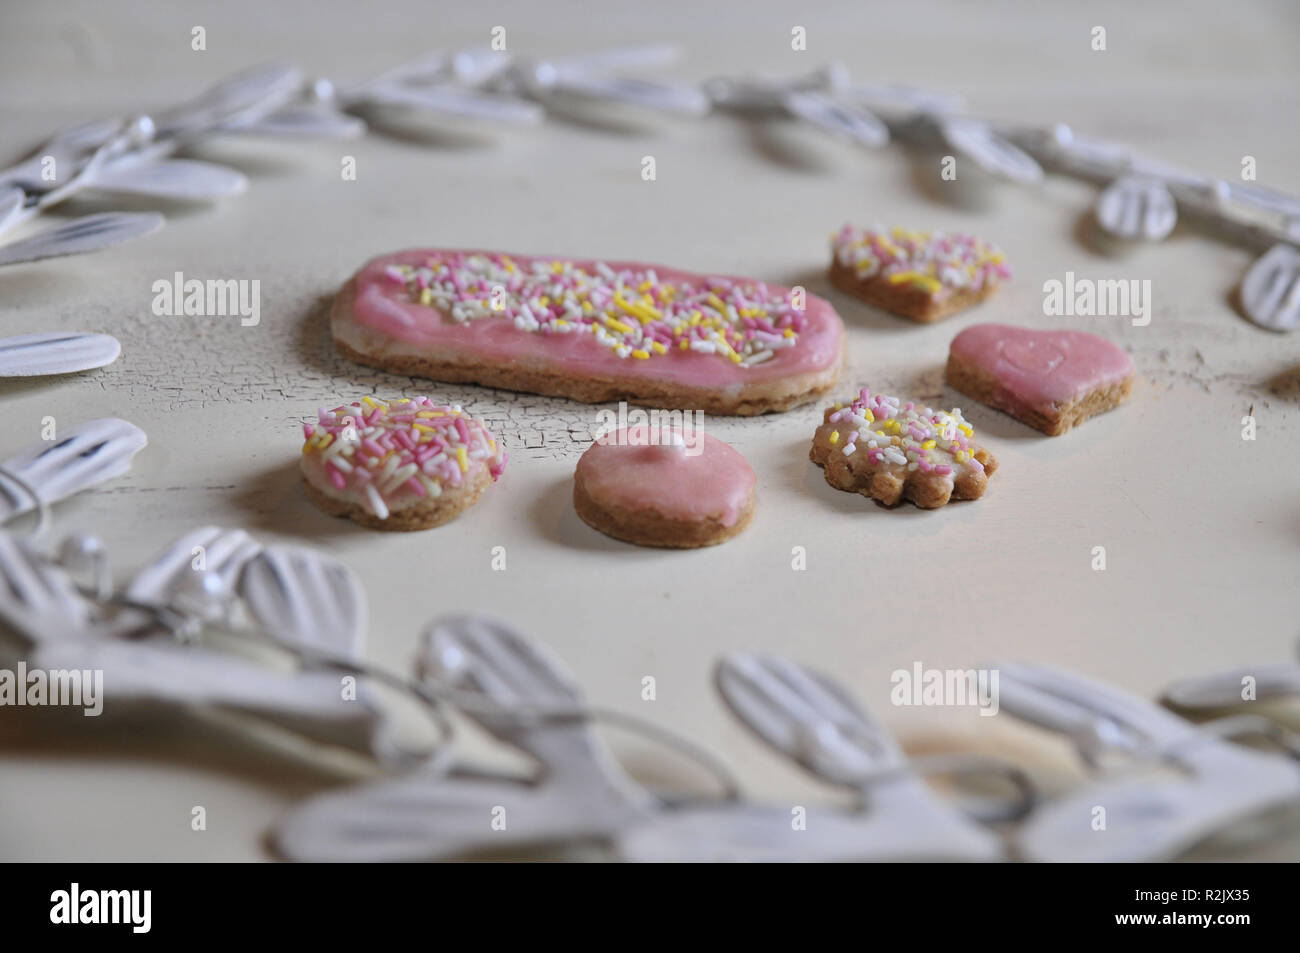 Cookies with pink fondant coating and colorful caster sugar with white metal wreath Stock Photo